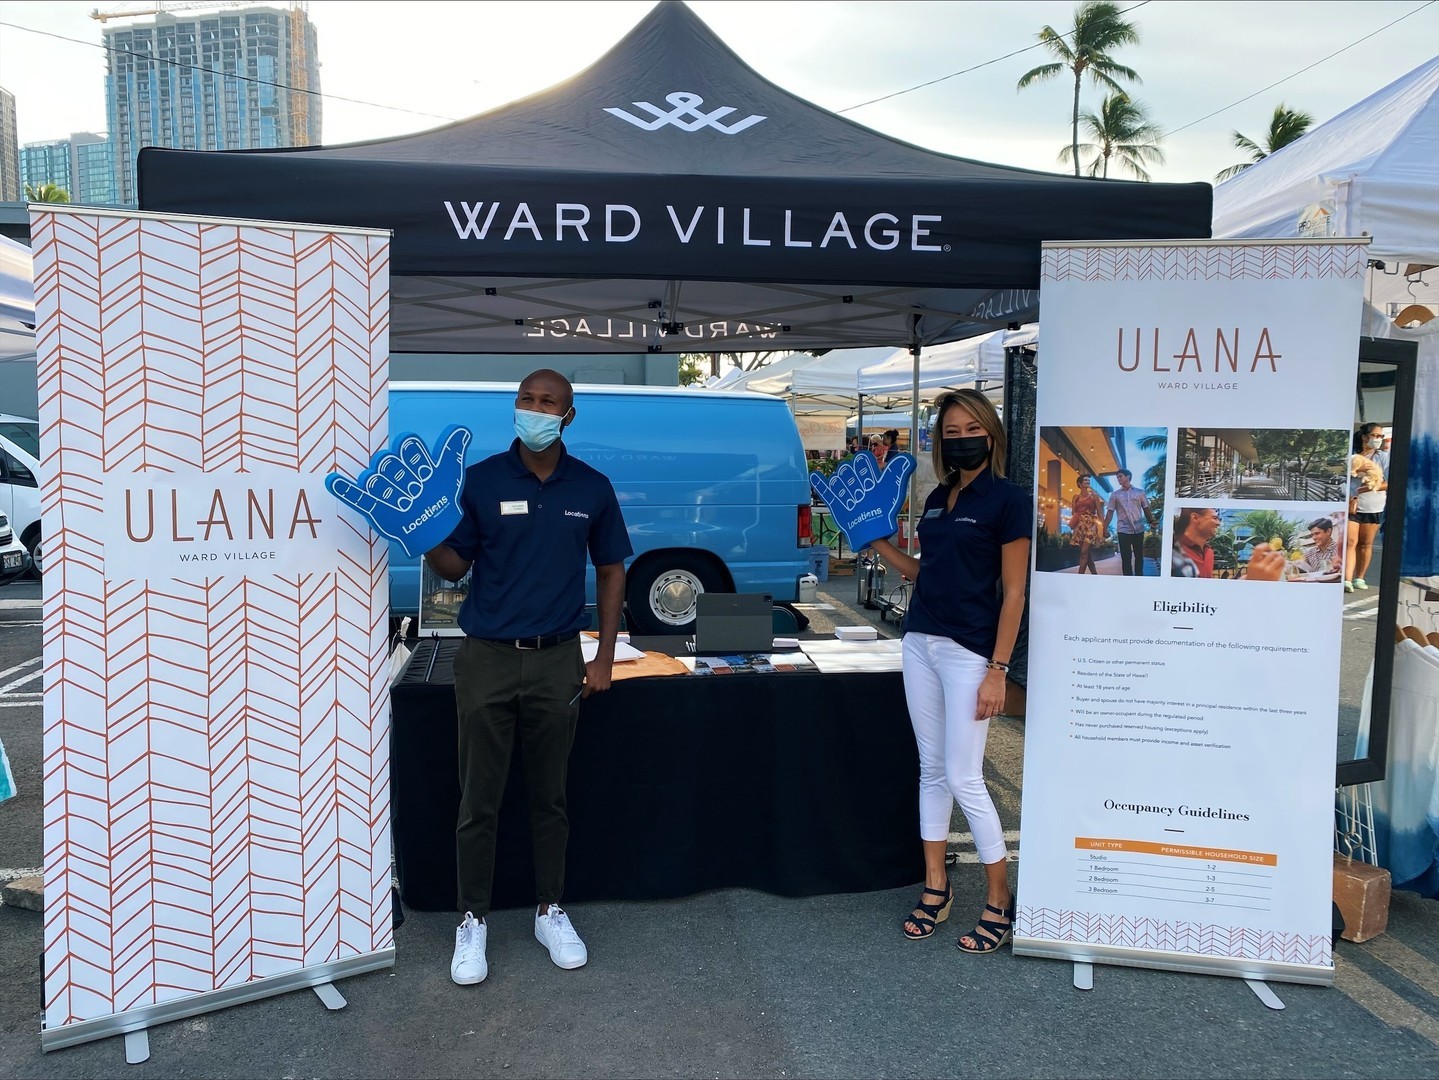 It’s the last month to pick up an application for Ulana! The Ulana Ward Village team will be at the Kaka‘ako Farmers Market on Saturday, December 4 so you can pick up an application as you get your shopping done. Ulana is going to be located minutes away from the Farmers Market, Kewalo Harbor and Ala Moana Beach Park, as well as all of the shopping, dining and entertainment in Ward Village. This reserved housing offering is available to Hawai‘i homebuyers who meet HCDA reserved housing criteria, with residences priced from $271,000 to $717,400.